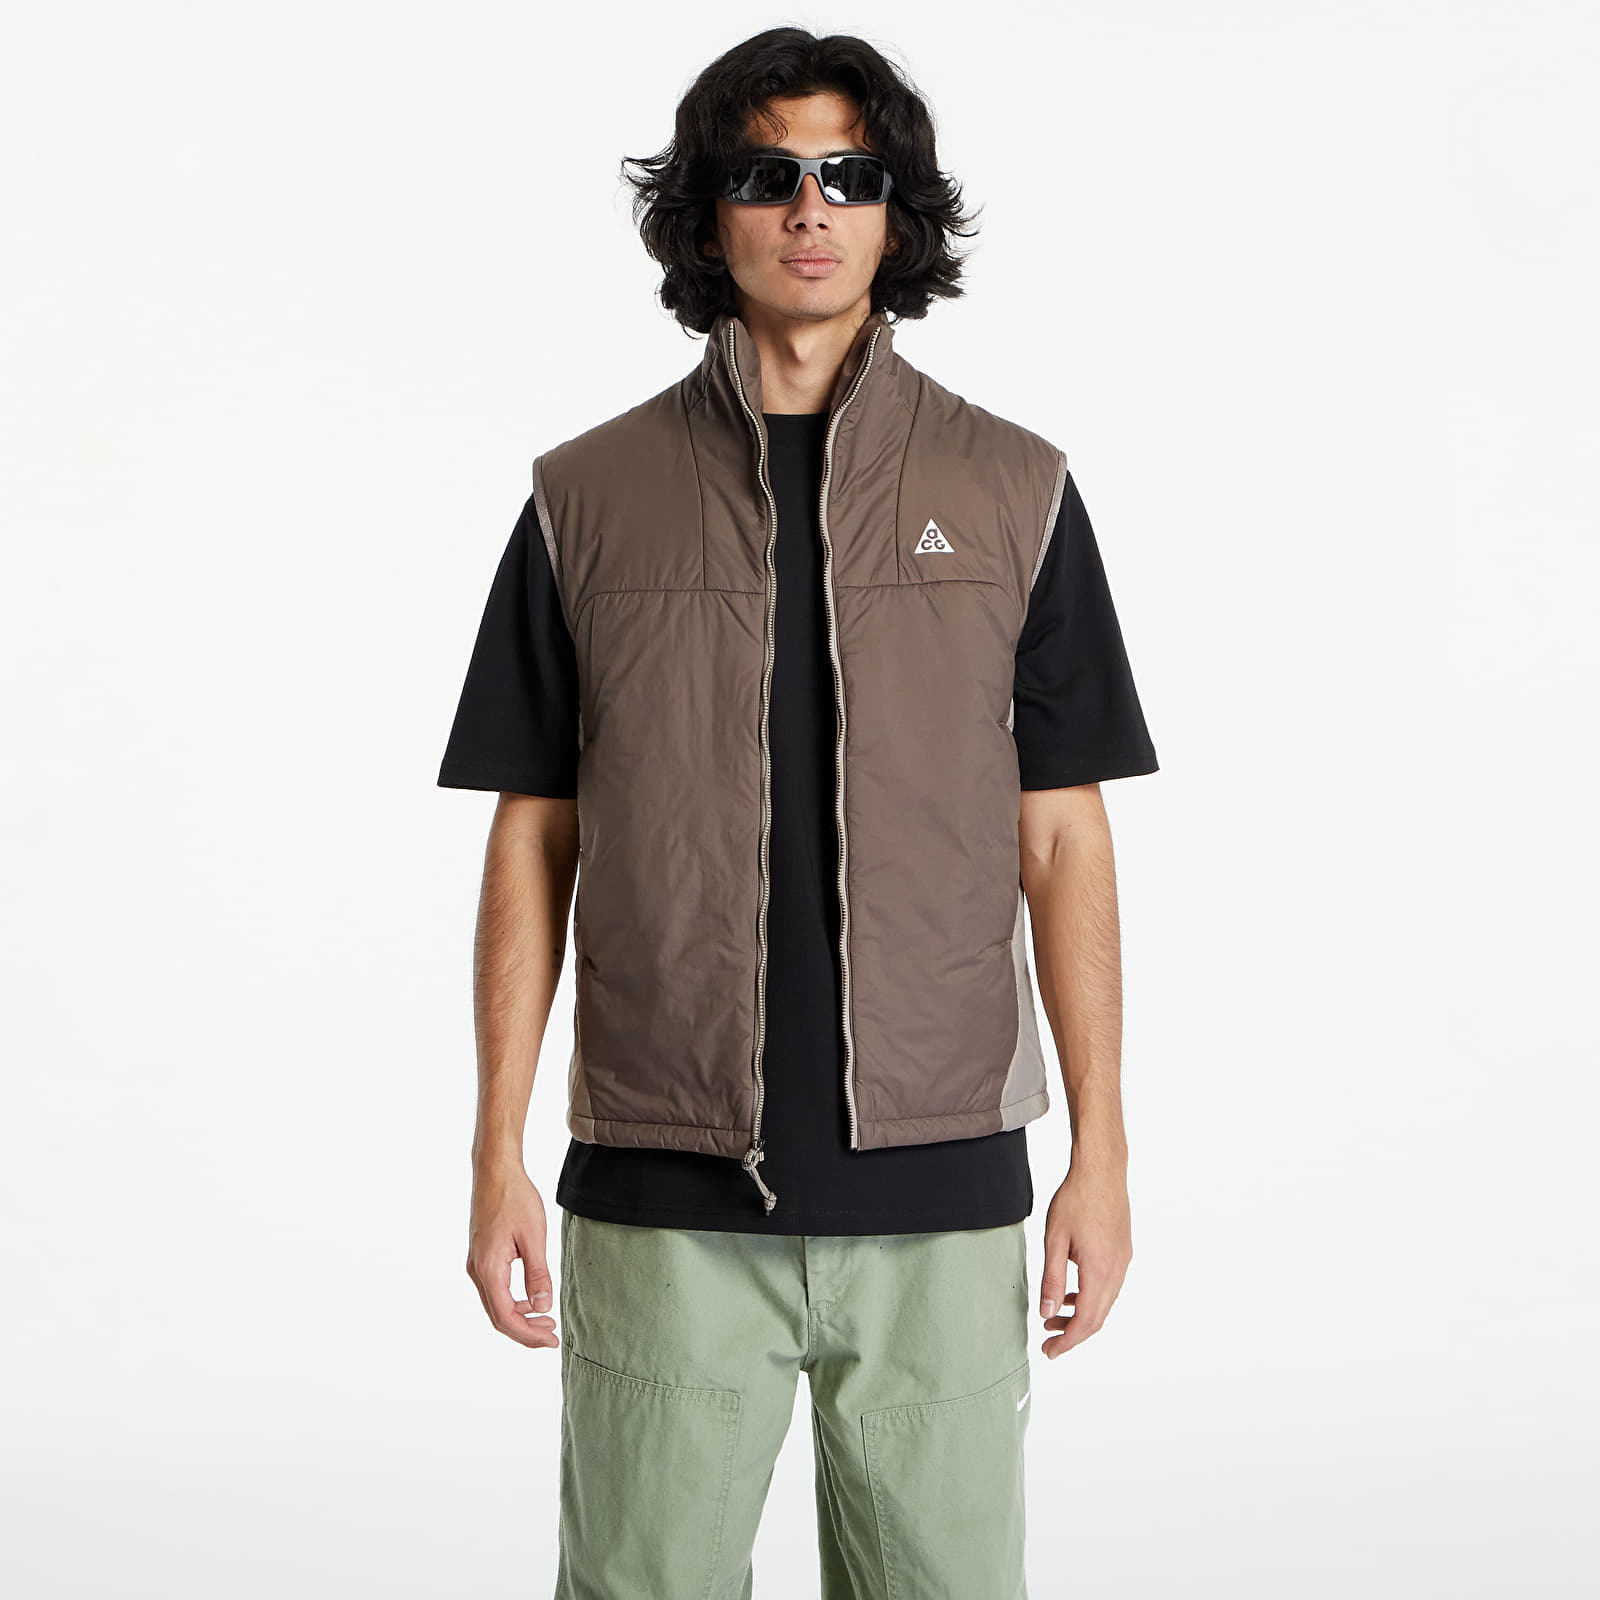 Nike - acg therma-fit adv "rope de dope" full-zip vest unisex ironstone/ moon fossil/ summit white